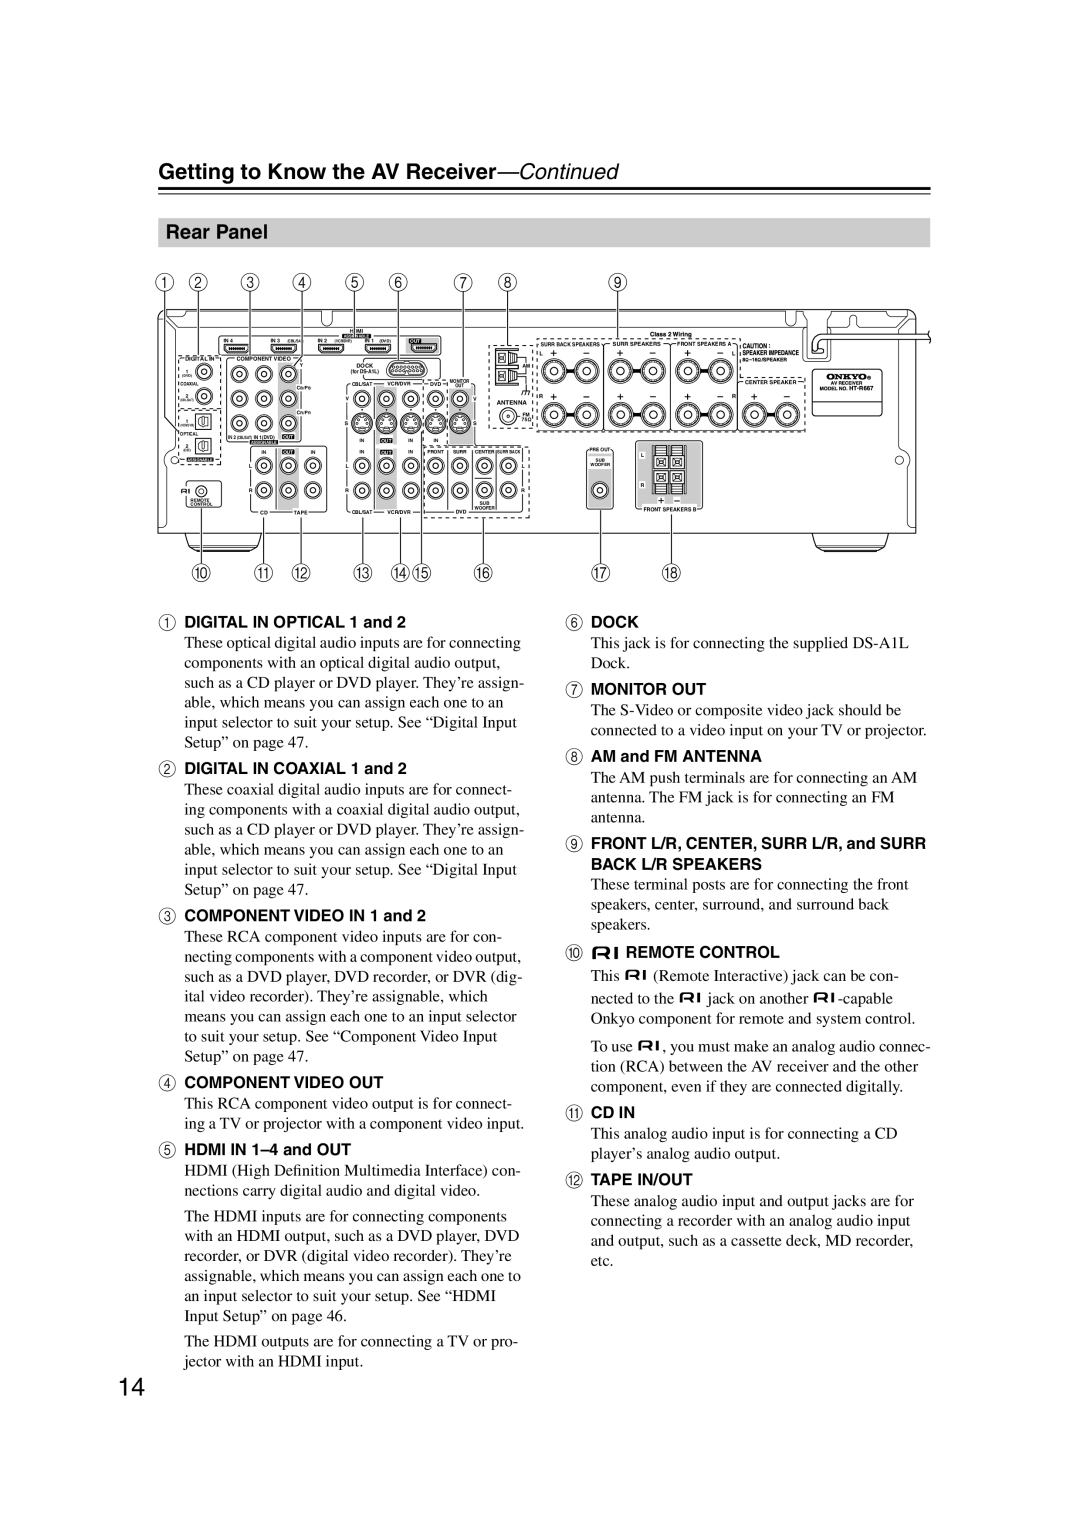 Onkyo HT-S6100 instruction manual Rear Panel, Getting to Know the AV Receiver-Continued, J K L M No P 